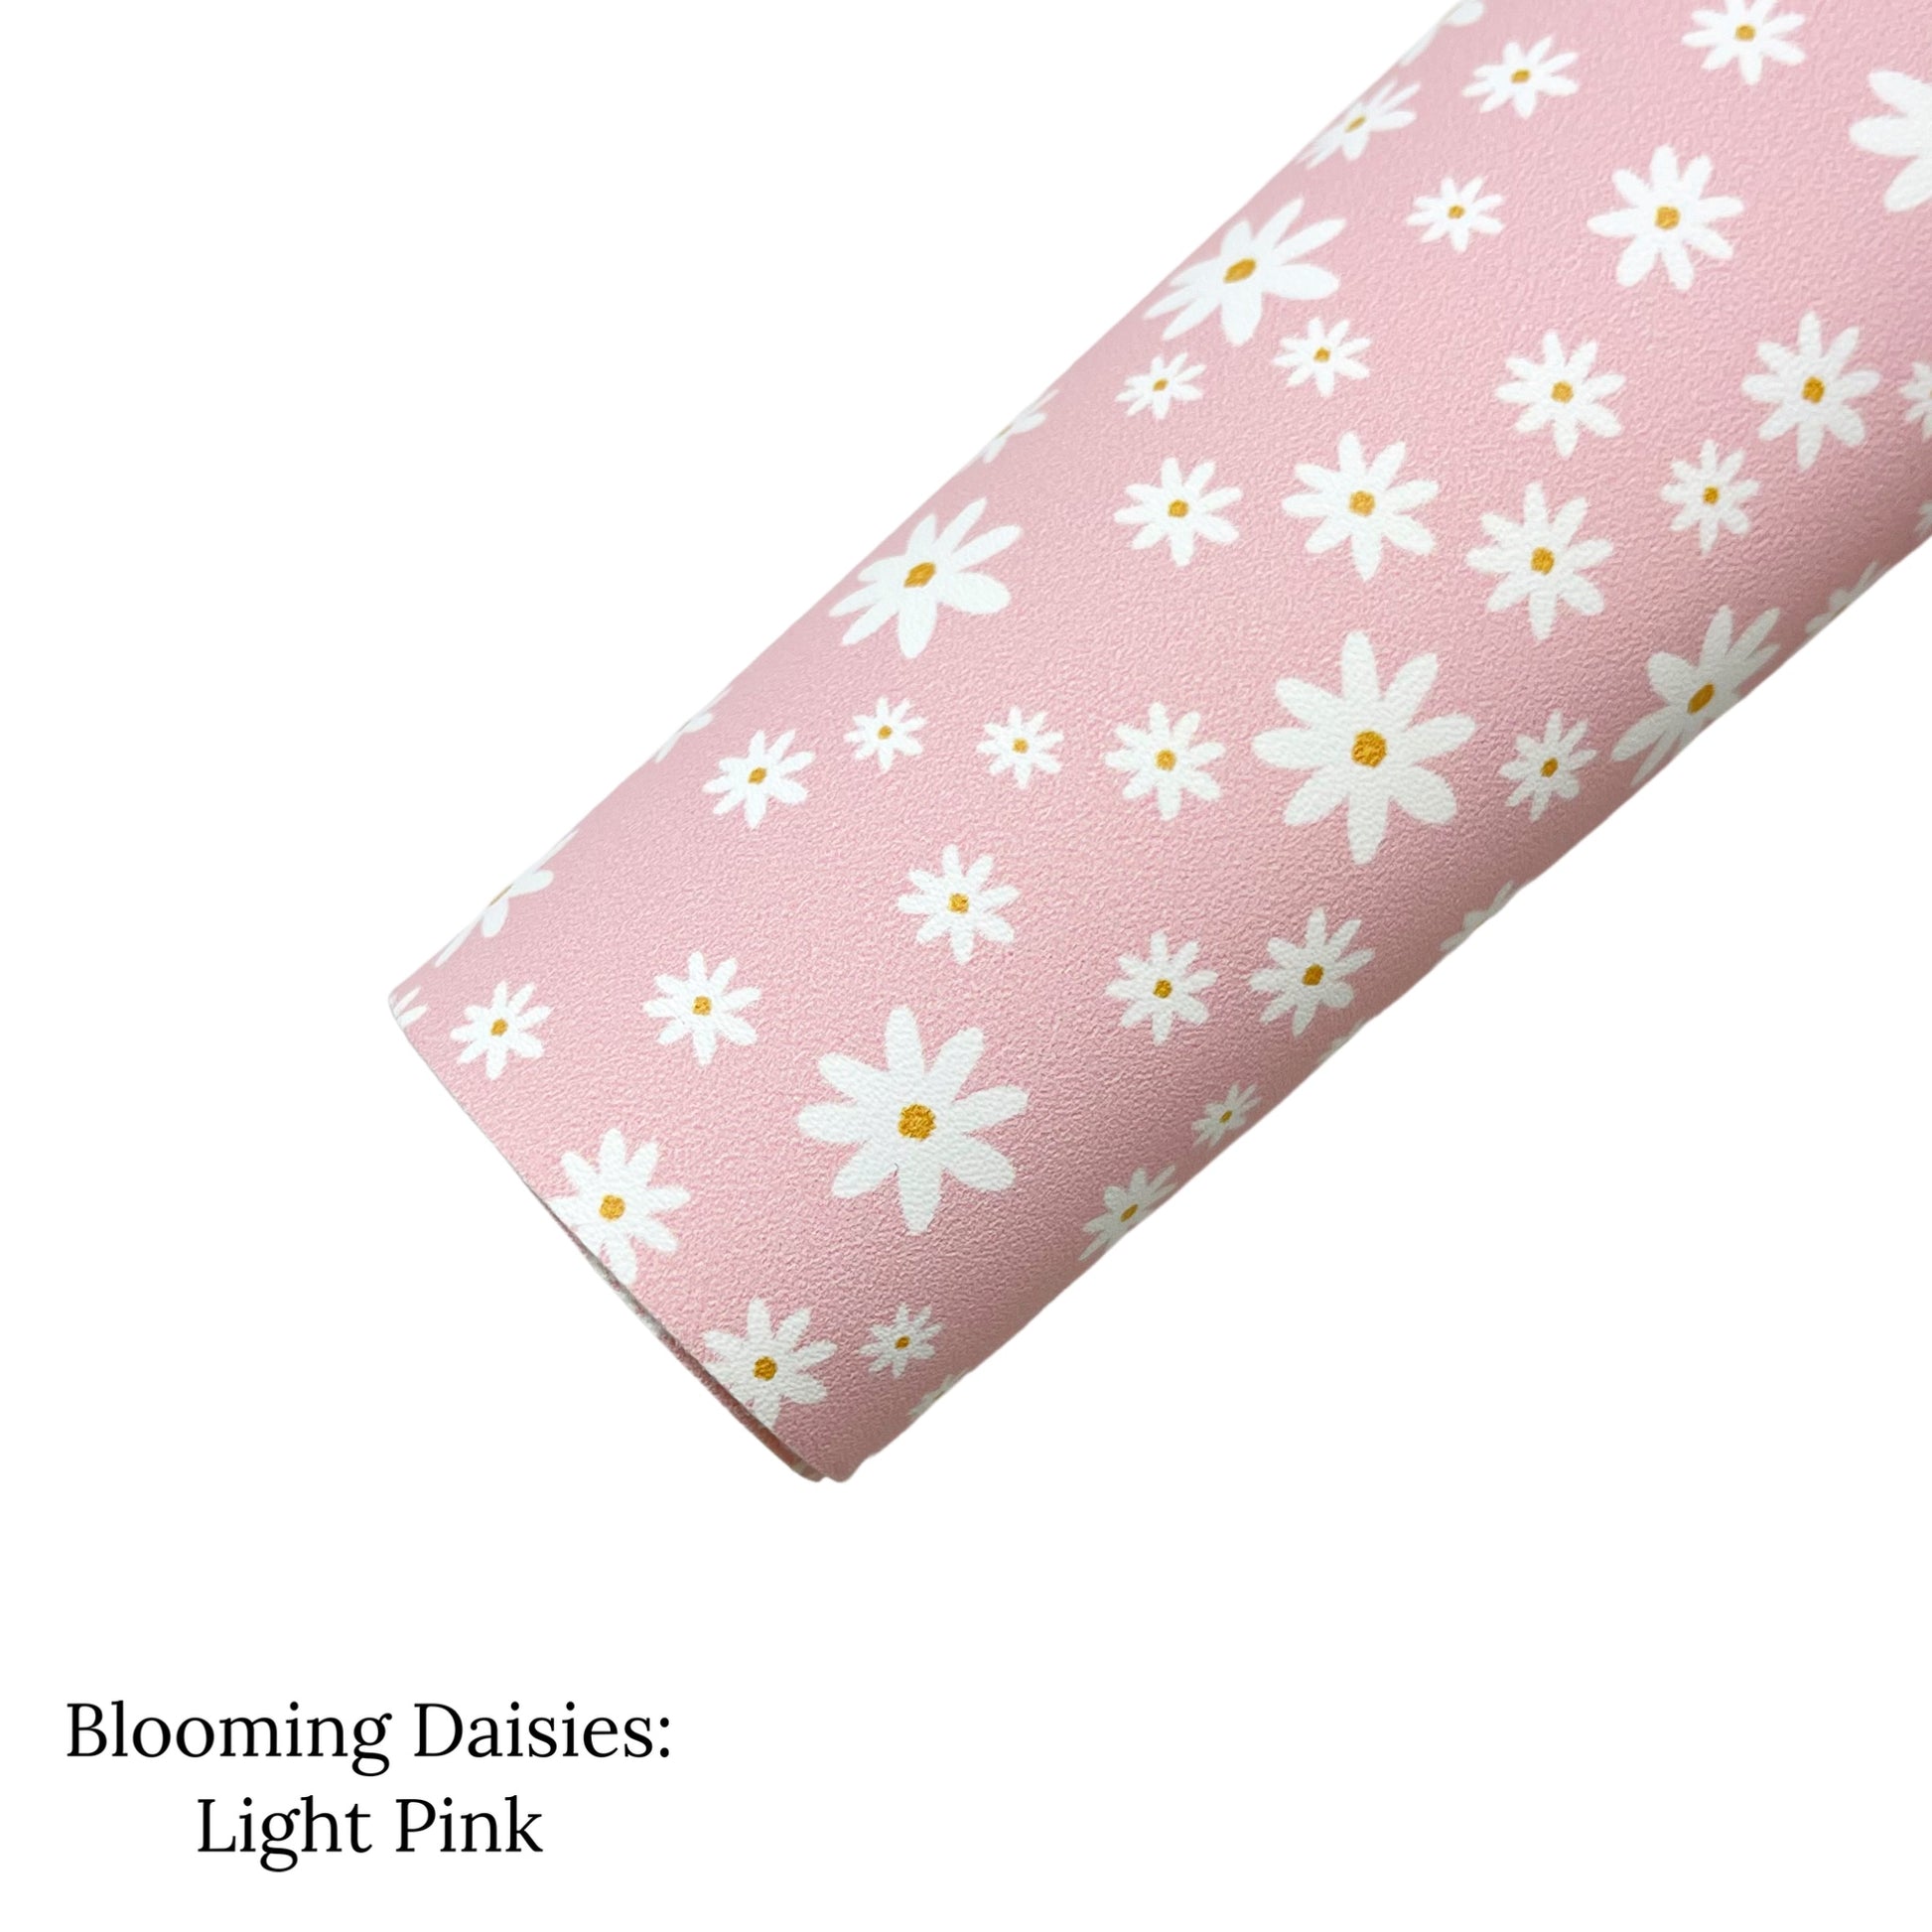 Rolled pale pink faux leather sheet with white and yellow daisy pattern.